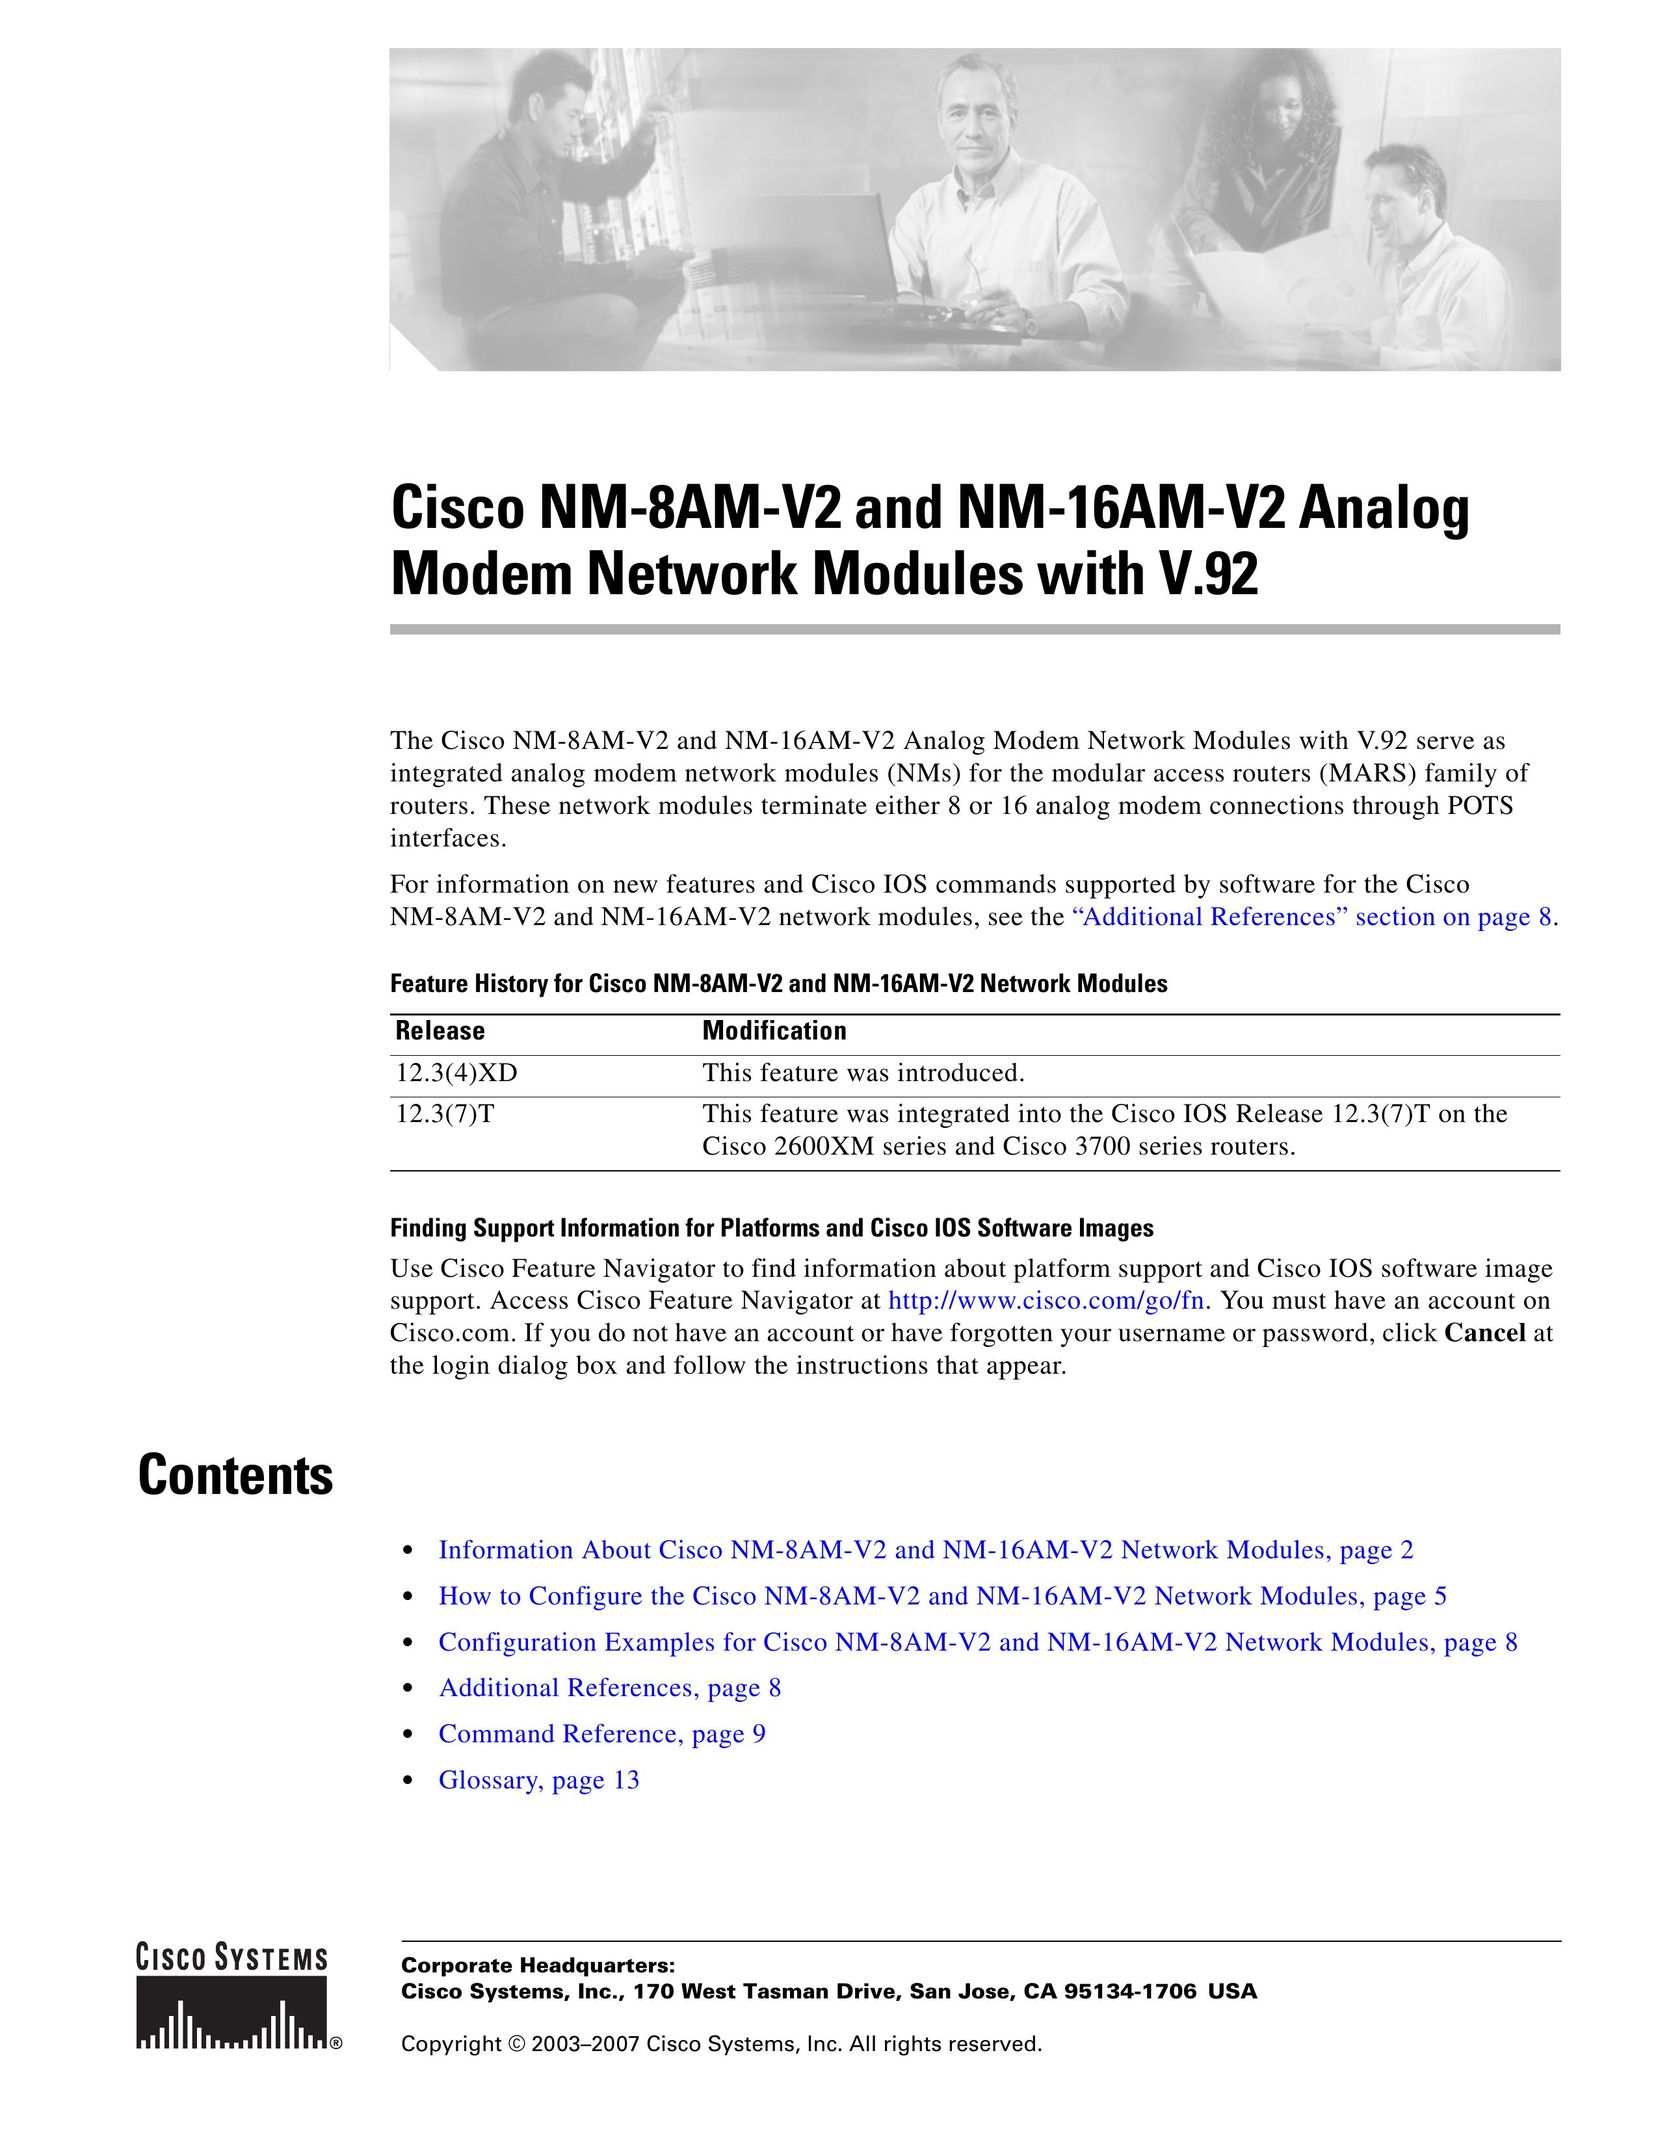 Cisco Systems NM-16AM-V2 Network Hardware User Manual